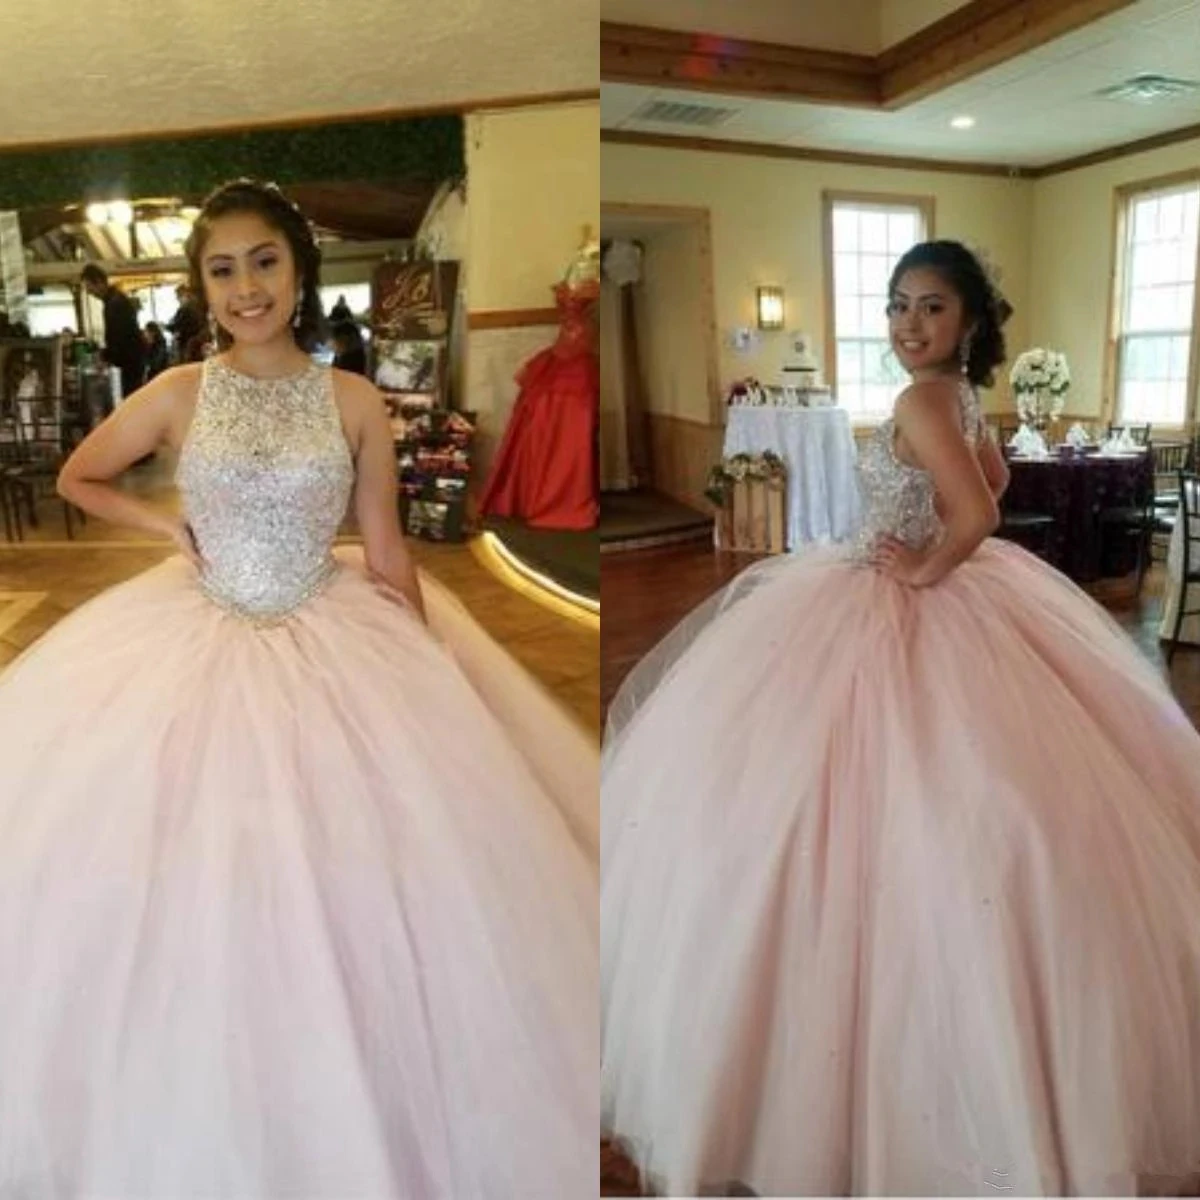 

ANGELSBRIDEP Scoops Neck Ball Gown Quinceanera Dresses Vestidos De 15 Anos Fashion Bling Bling Bodice Cinderella Party Gowns